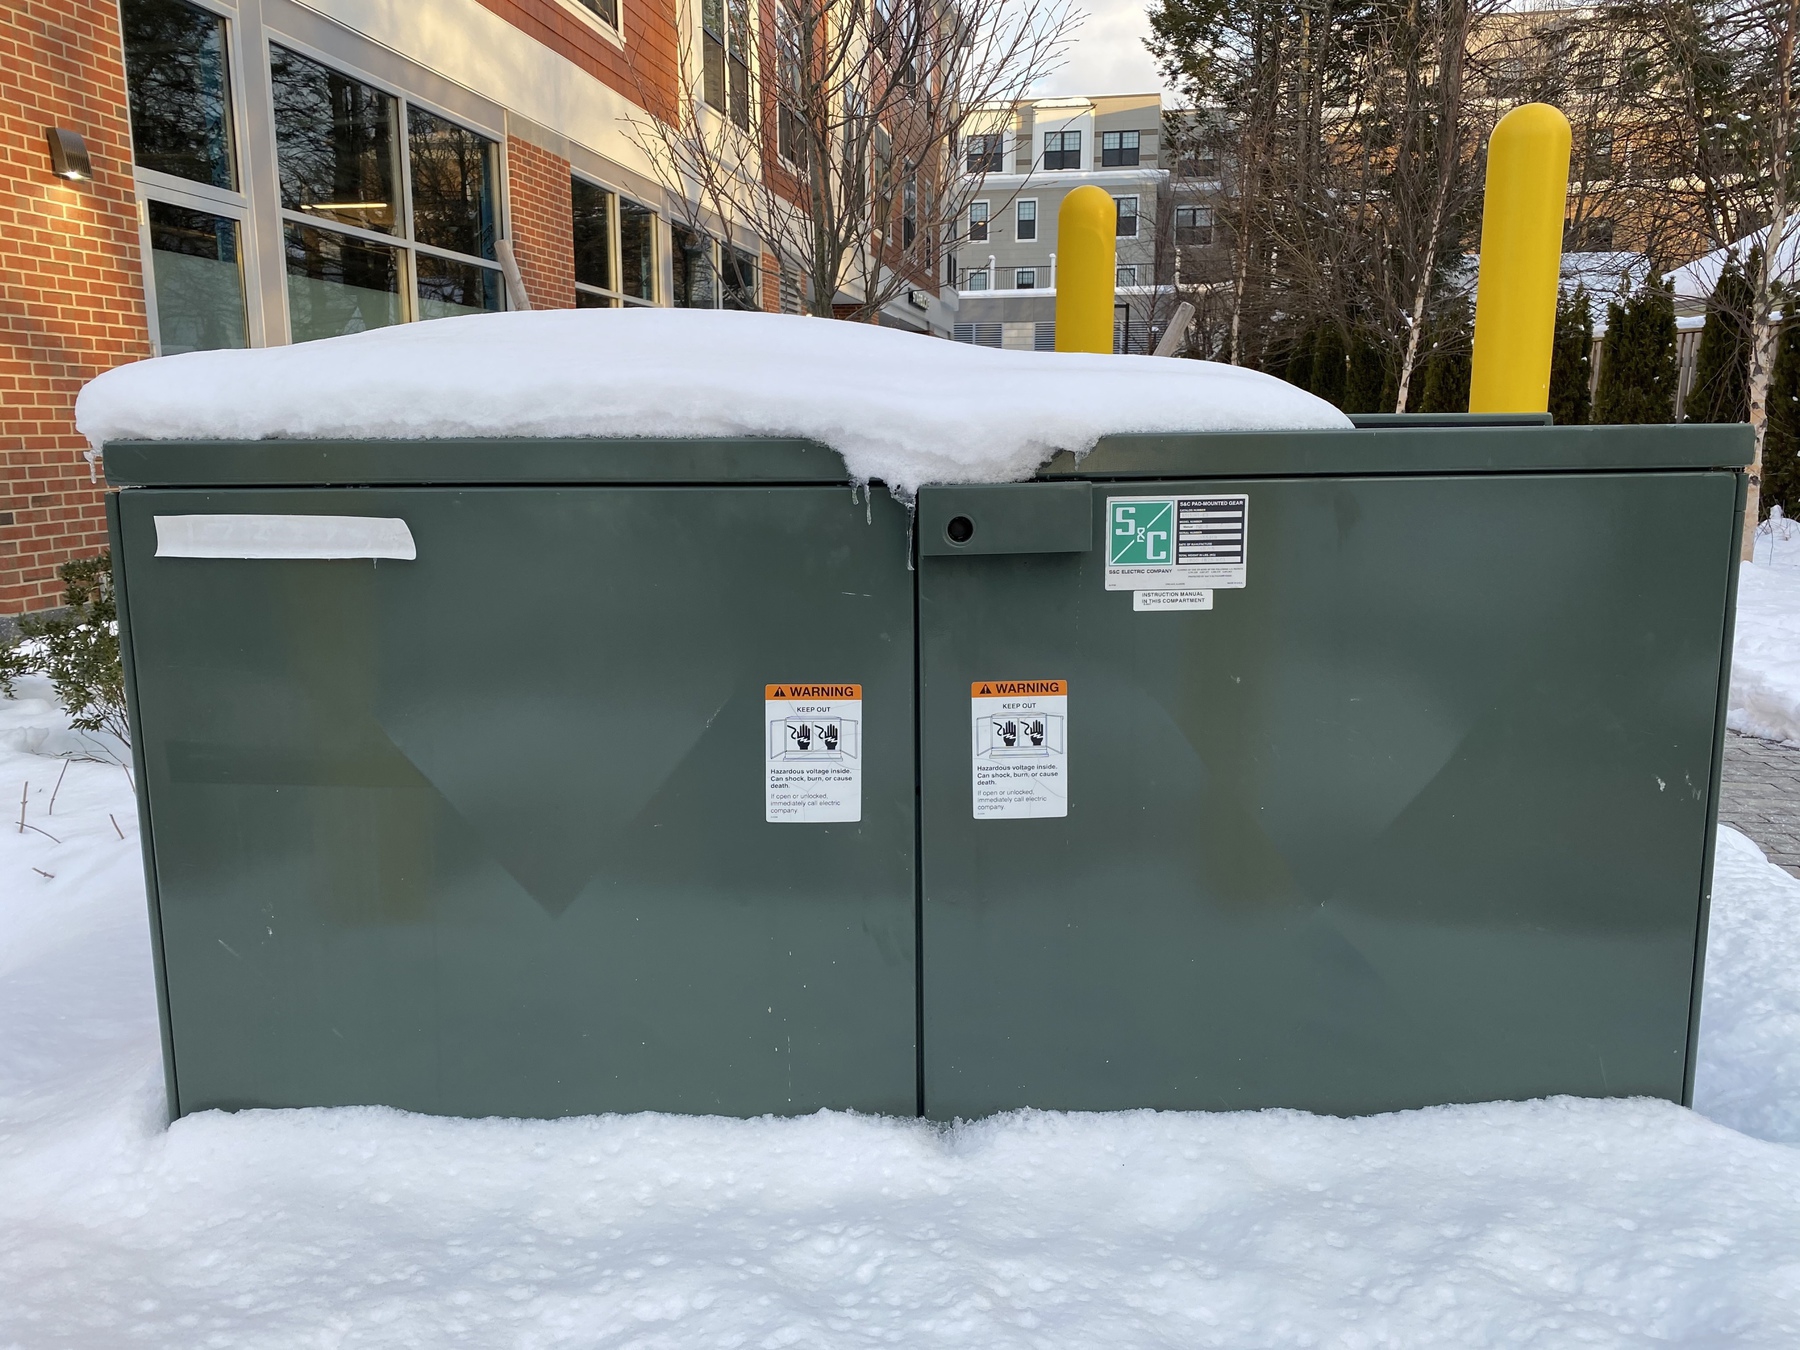 View of a power box behind a brick building, covered in snow.